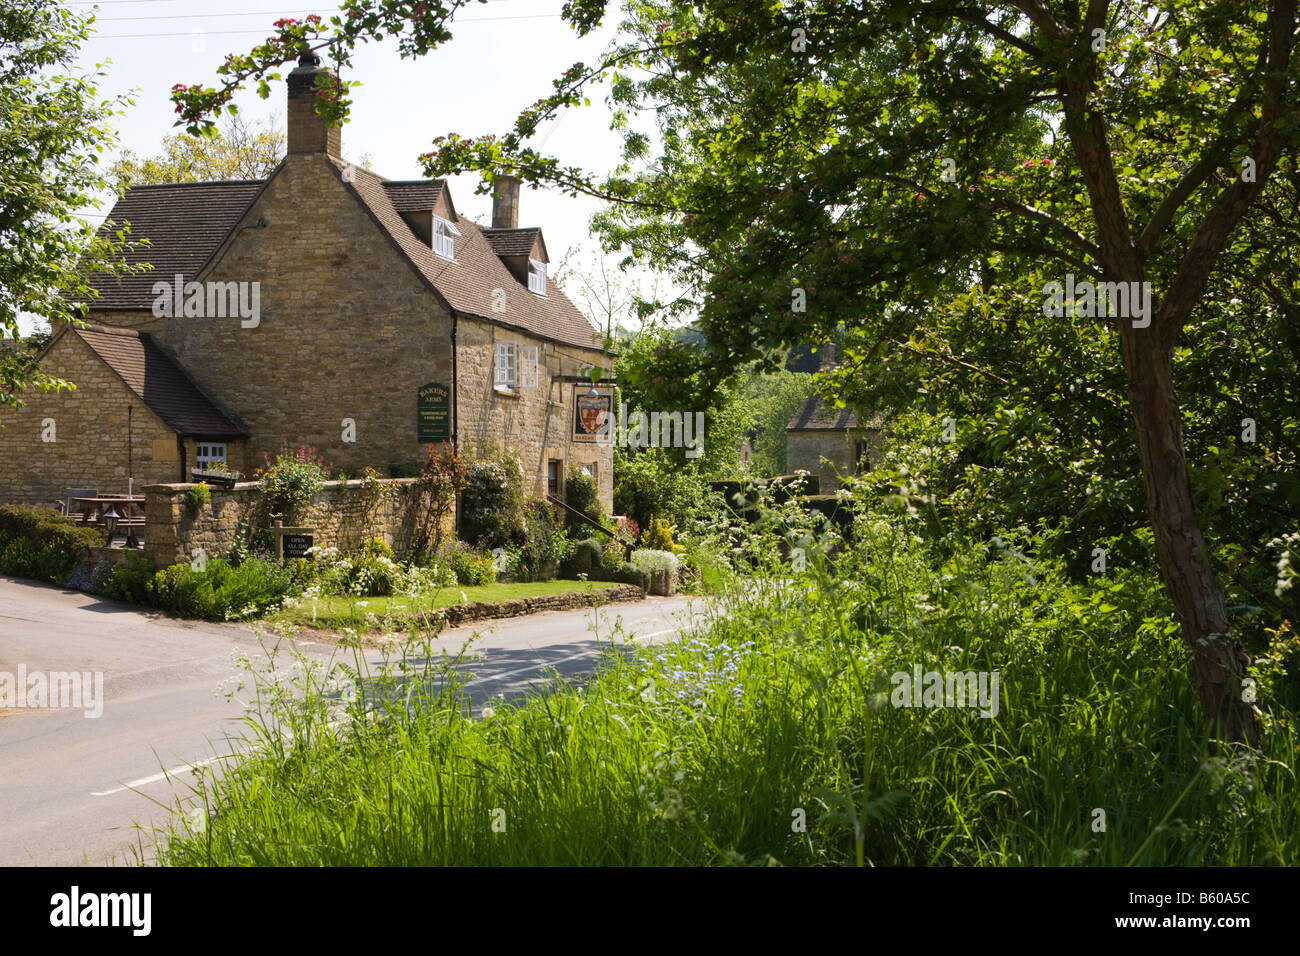 The Bakers Arms public house in the Cotswold village of Broad Campden, Gloucestershire Stock Photo